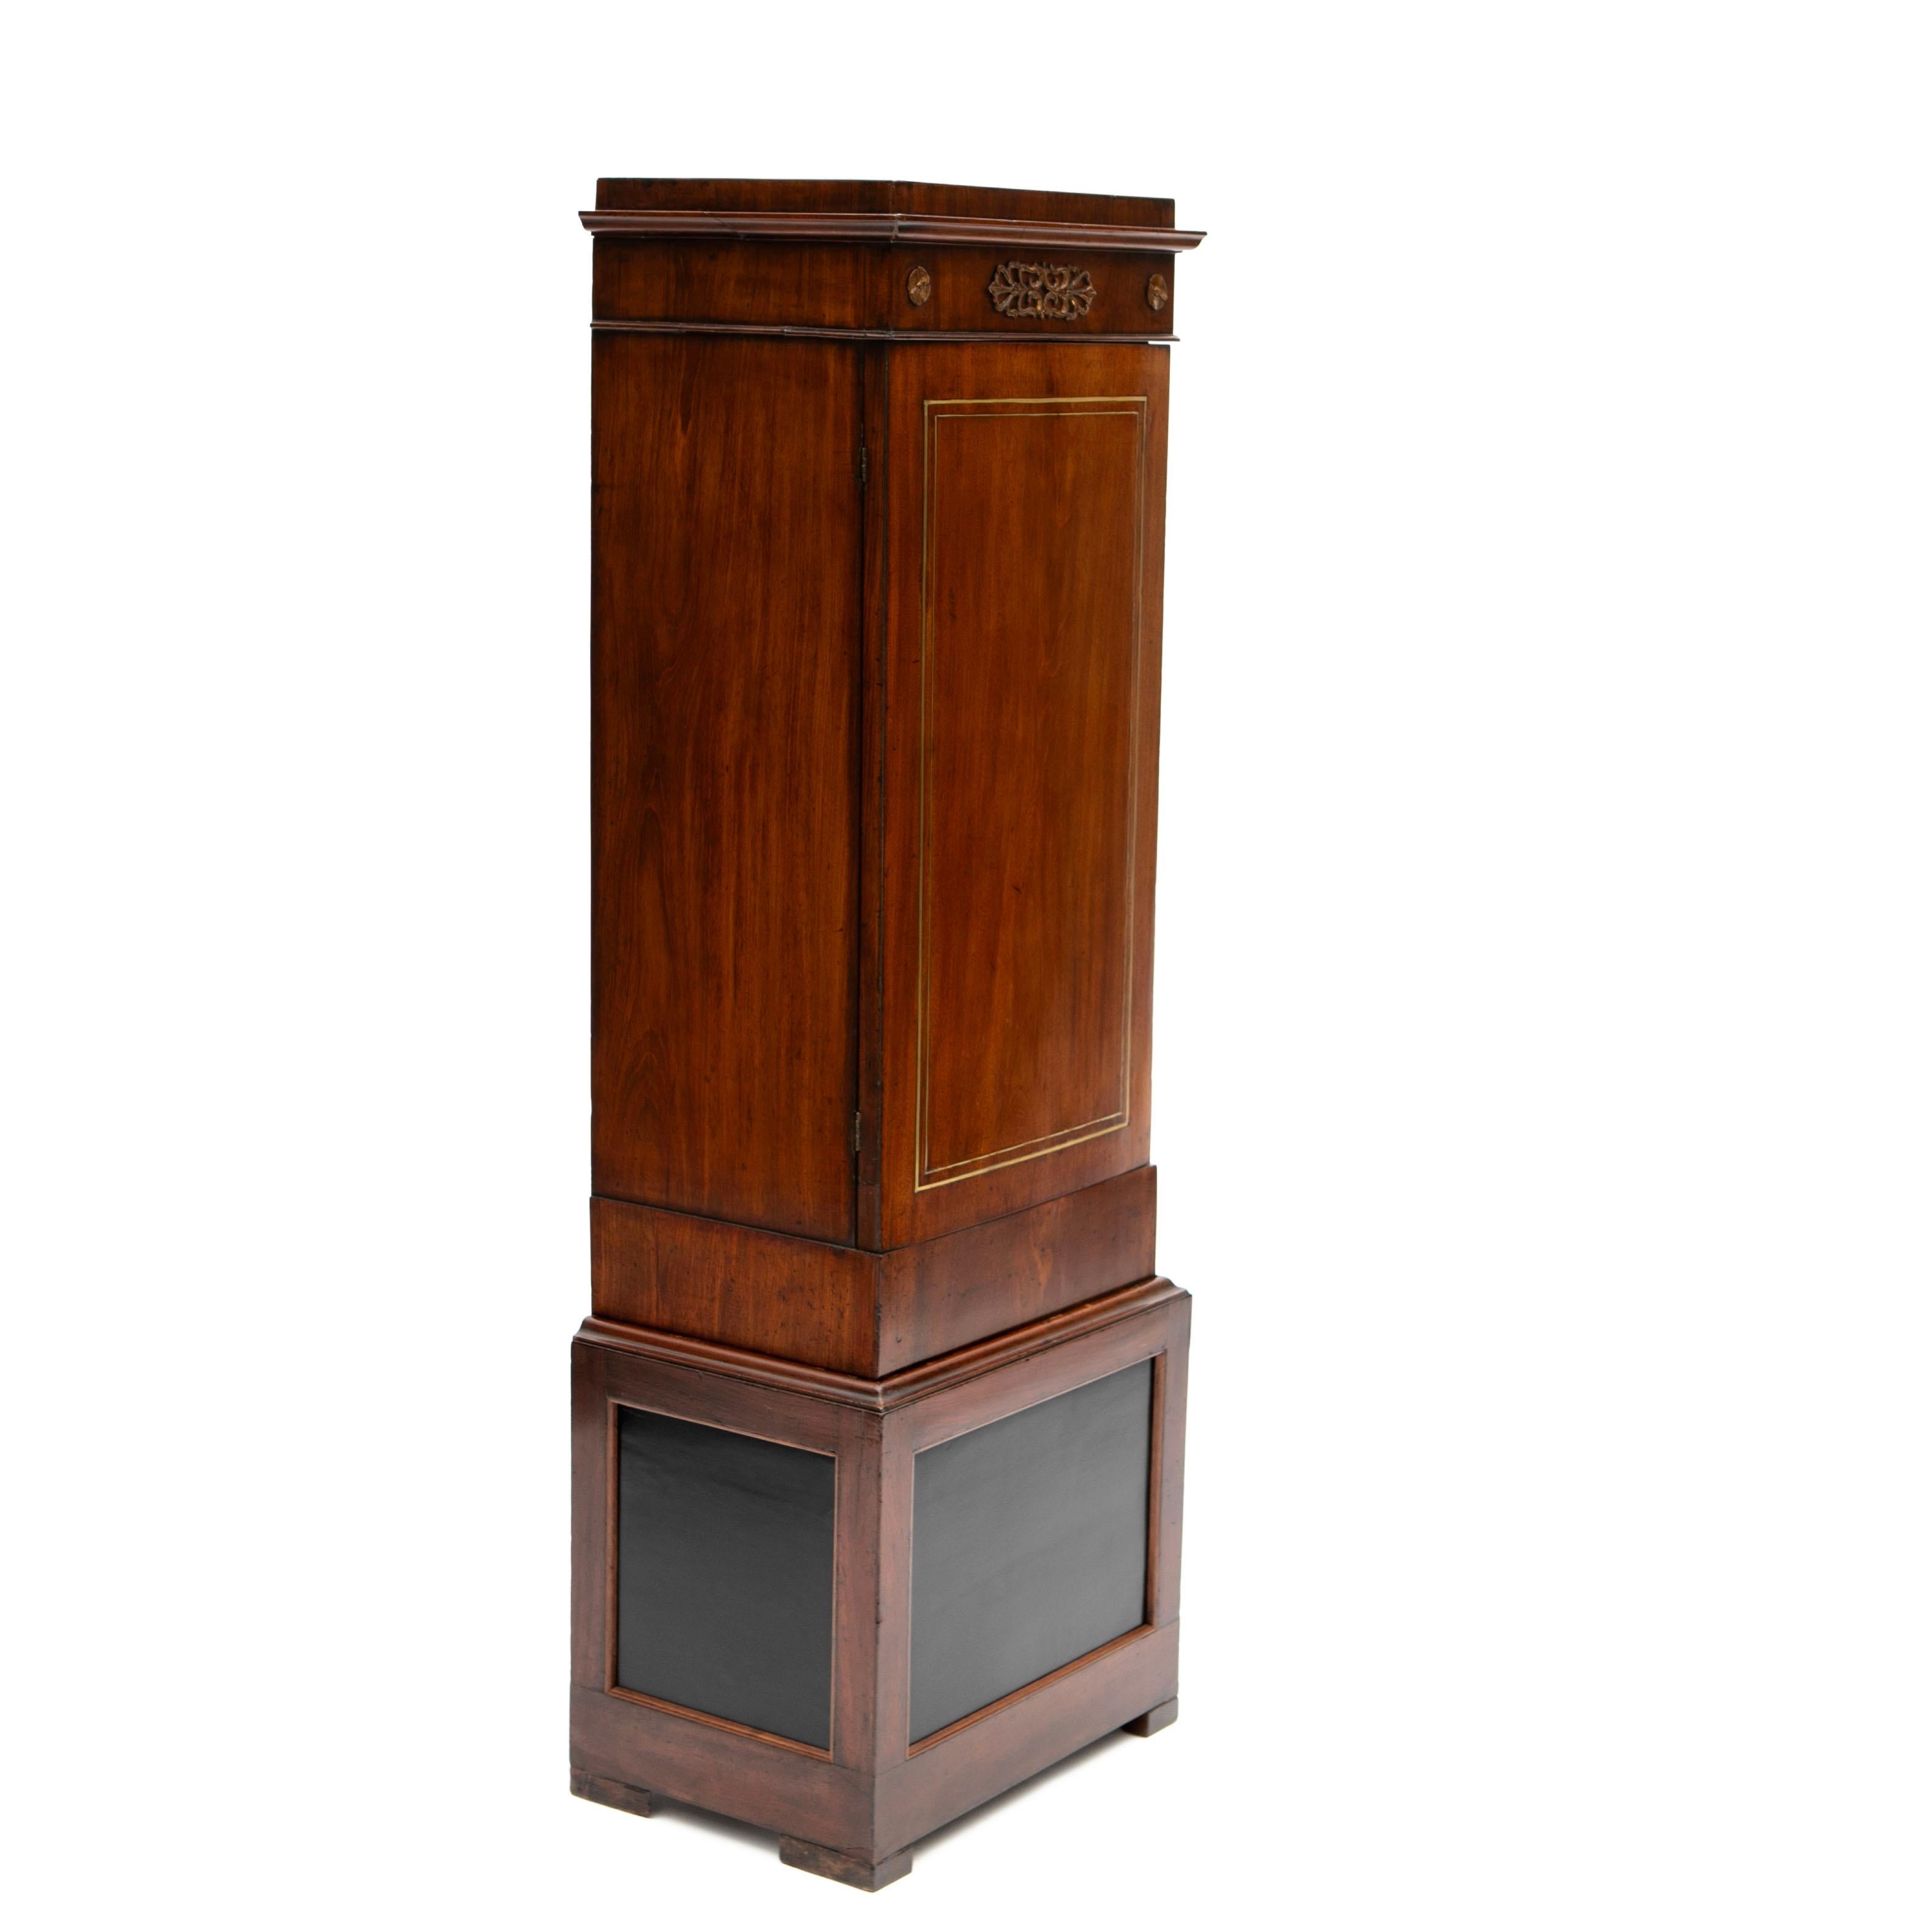 Elegant Early 19th Century Empire Mahogany Pedestal Cabinet In Good Condition For Sale In Kastrup, DK